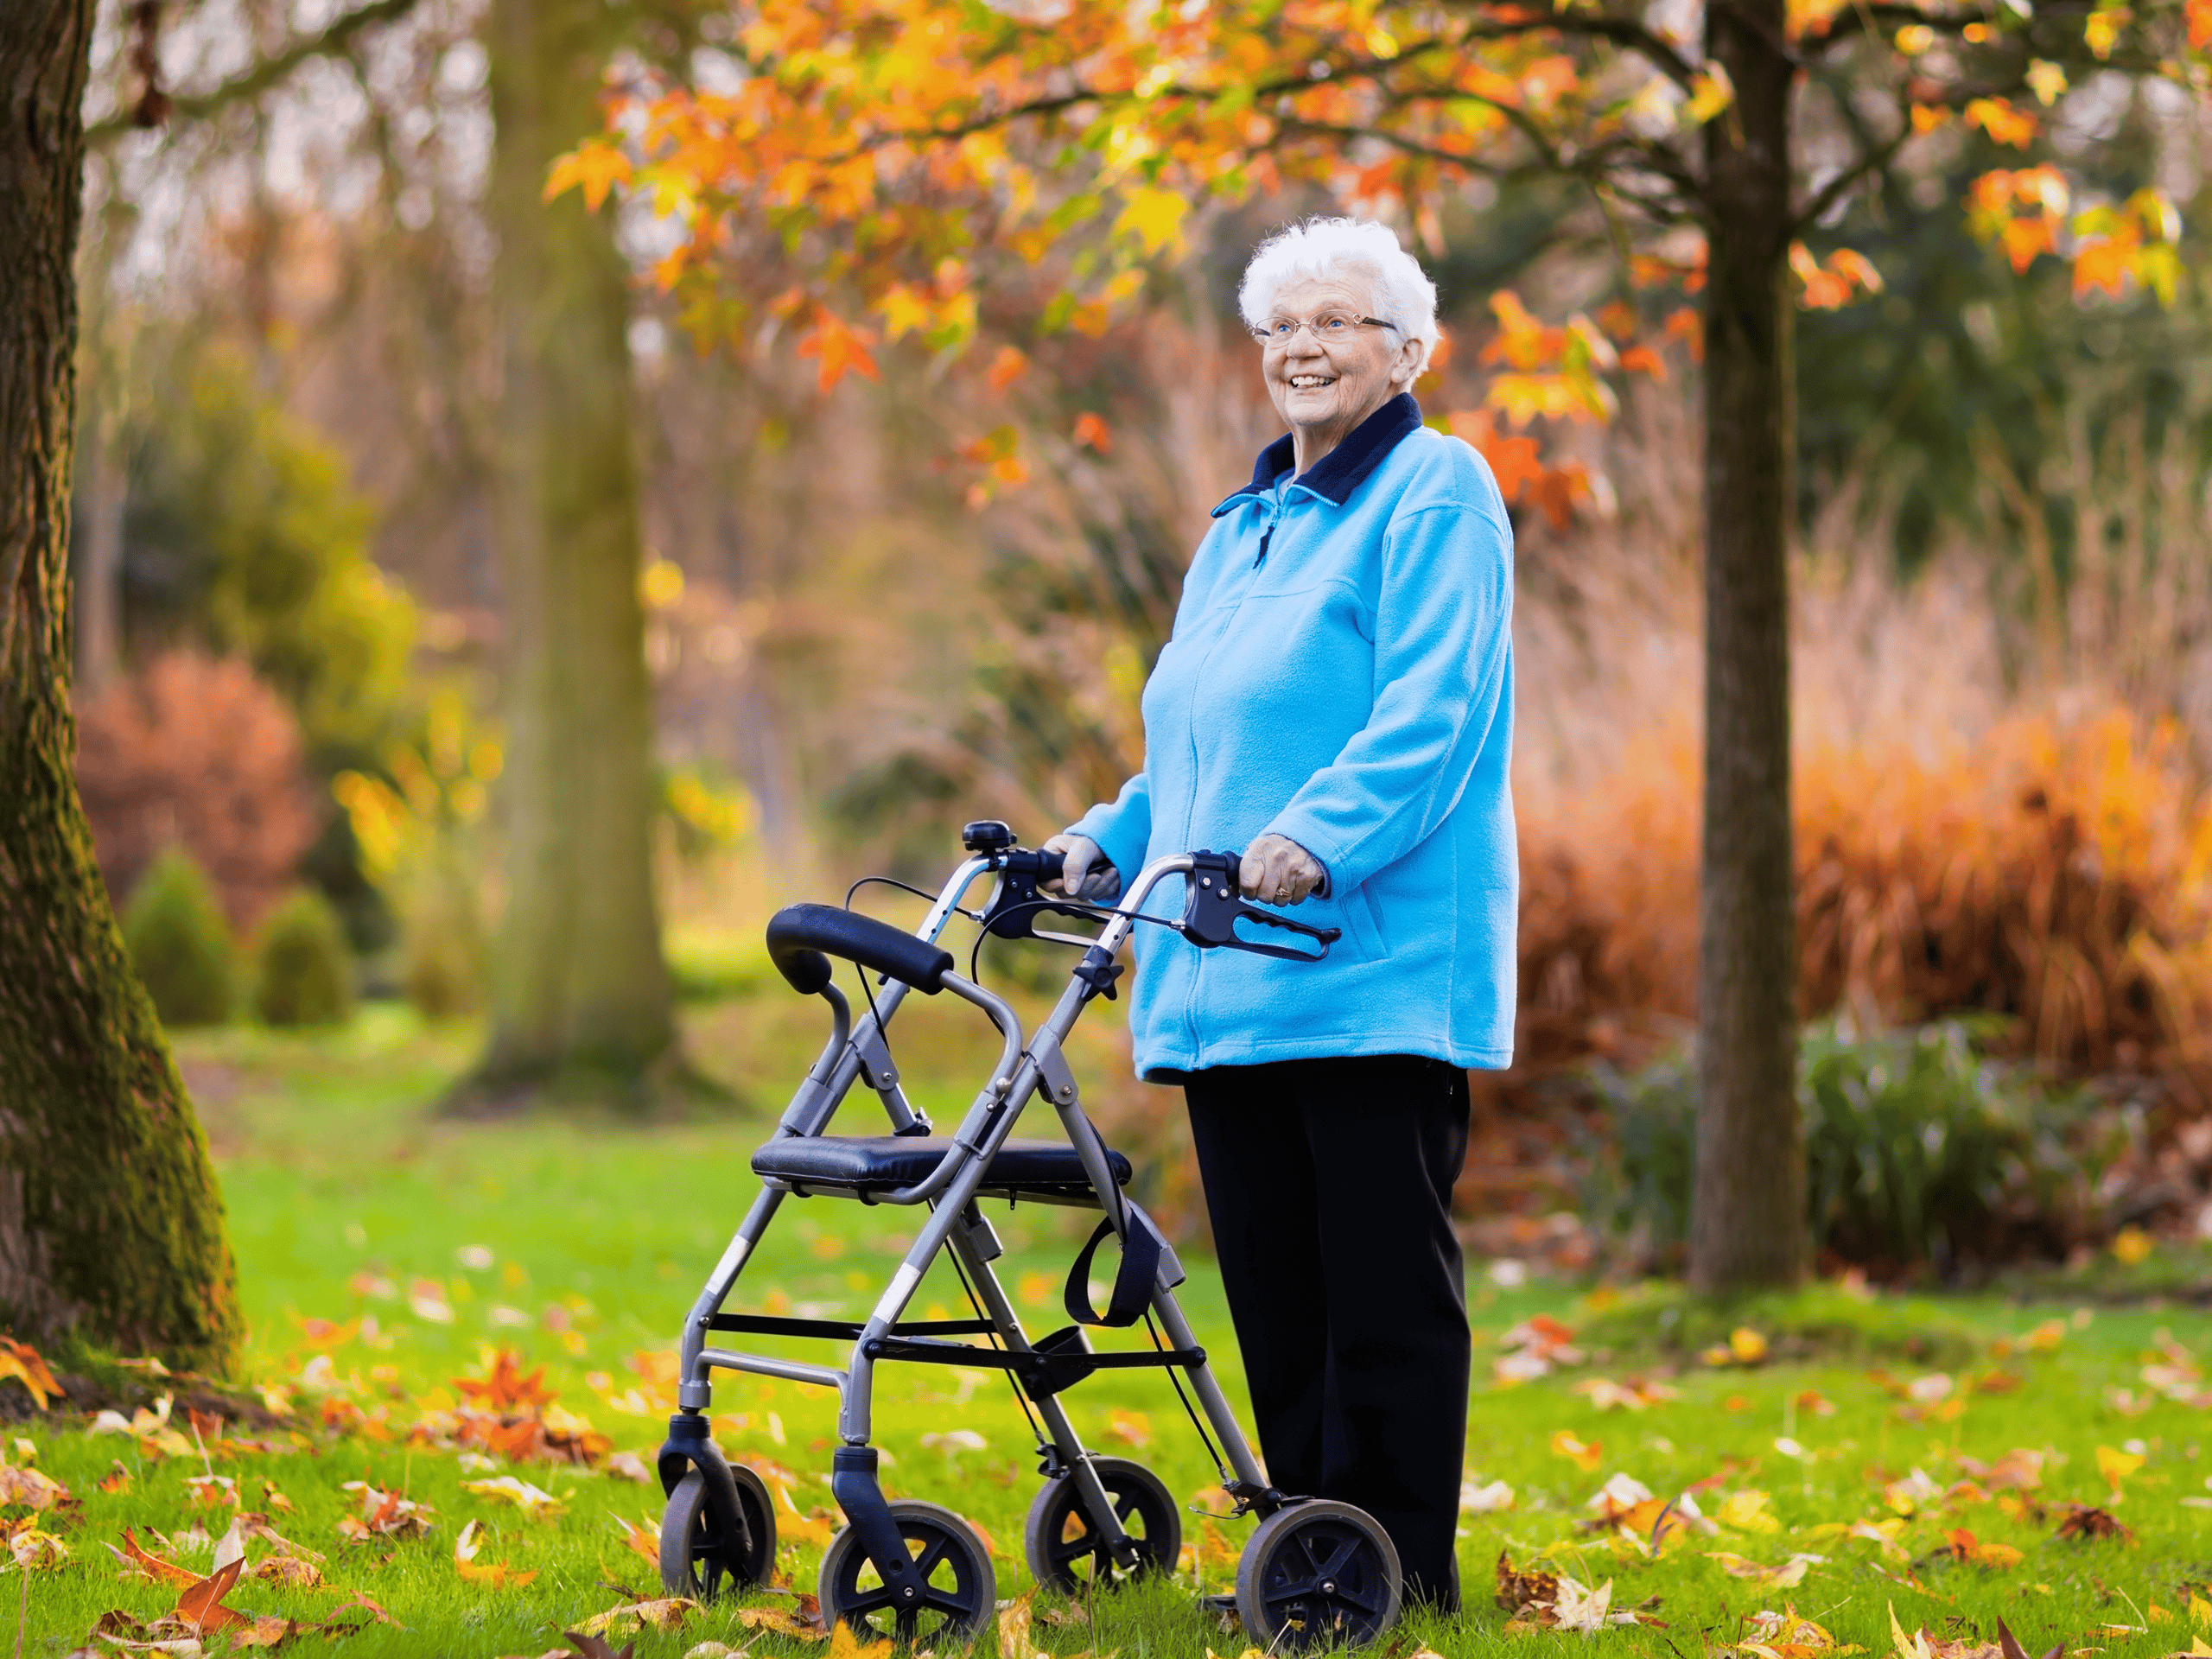 Senior using a falls prevention strategy while staying alert as she navigates uneven terrain with her walker